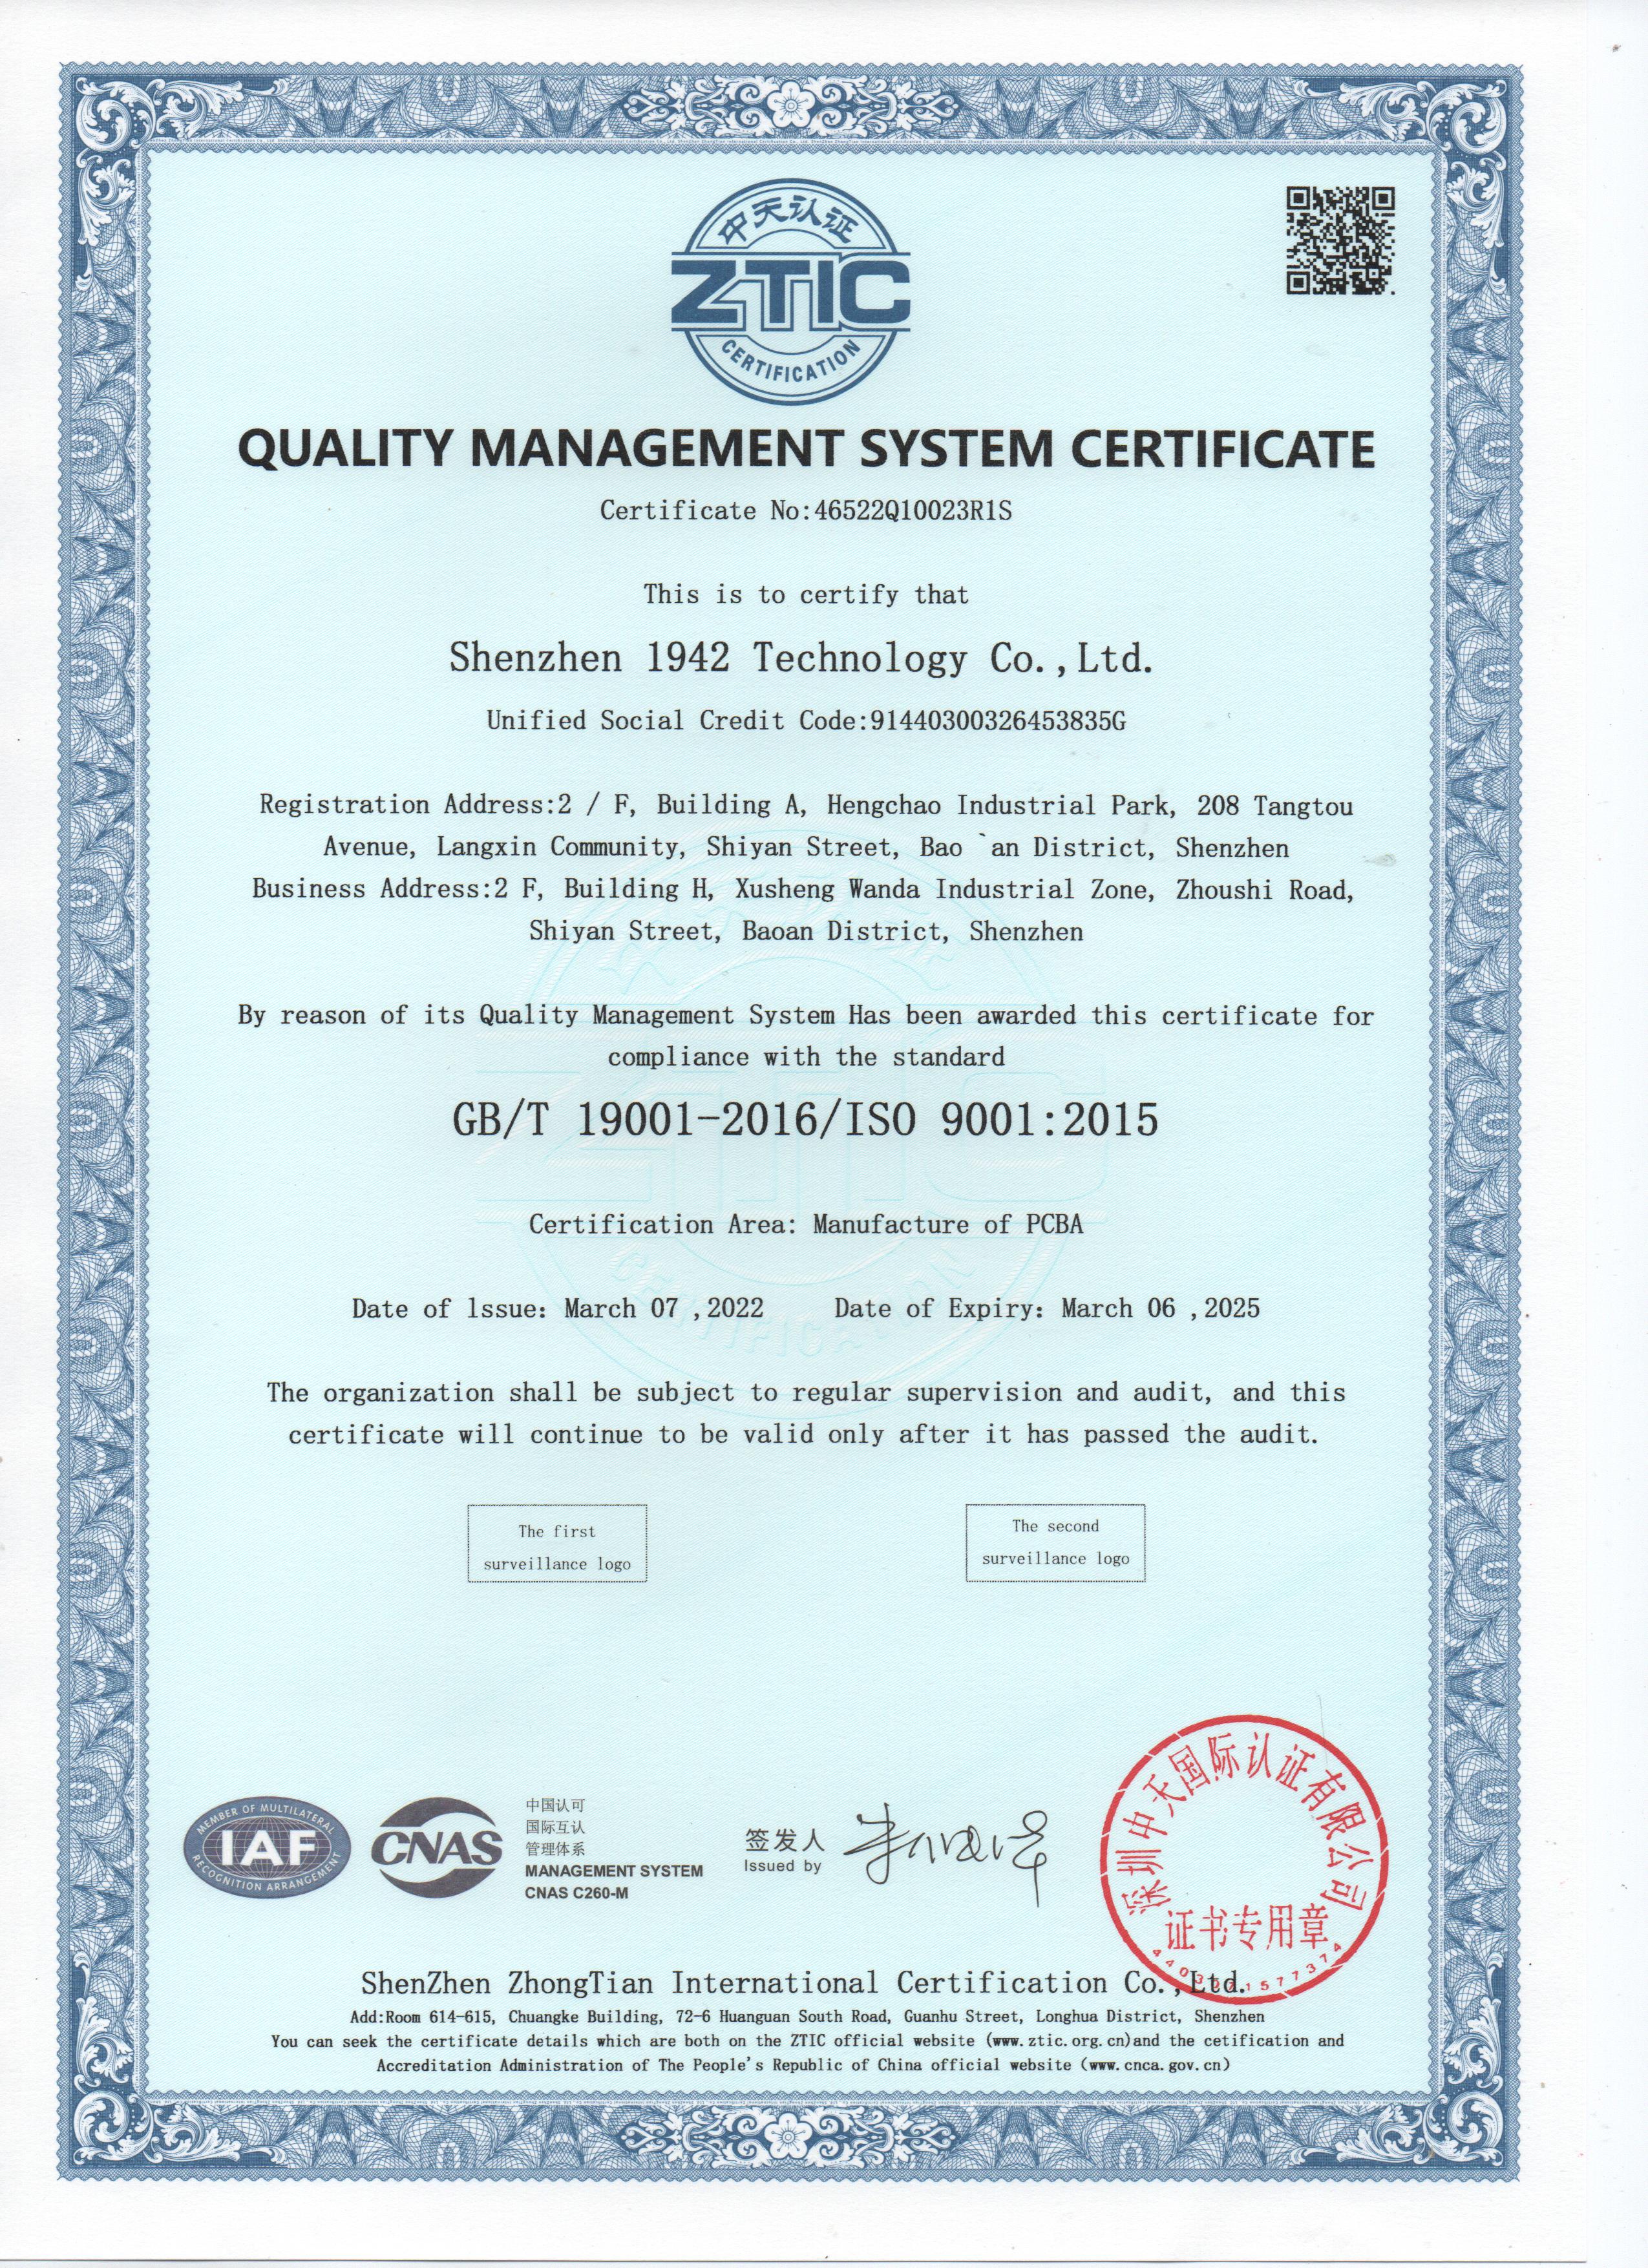 Quality management system certification ISO:9001